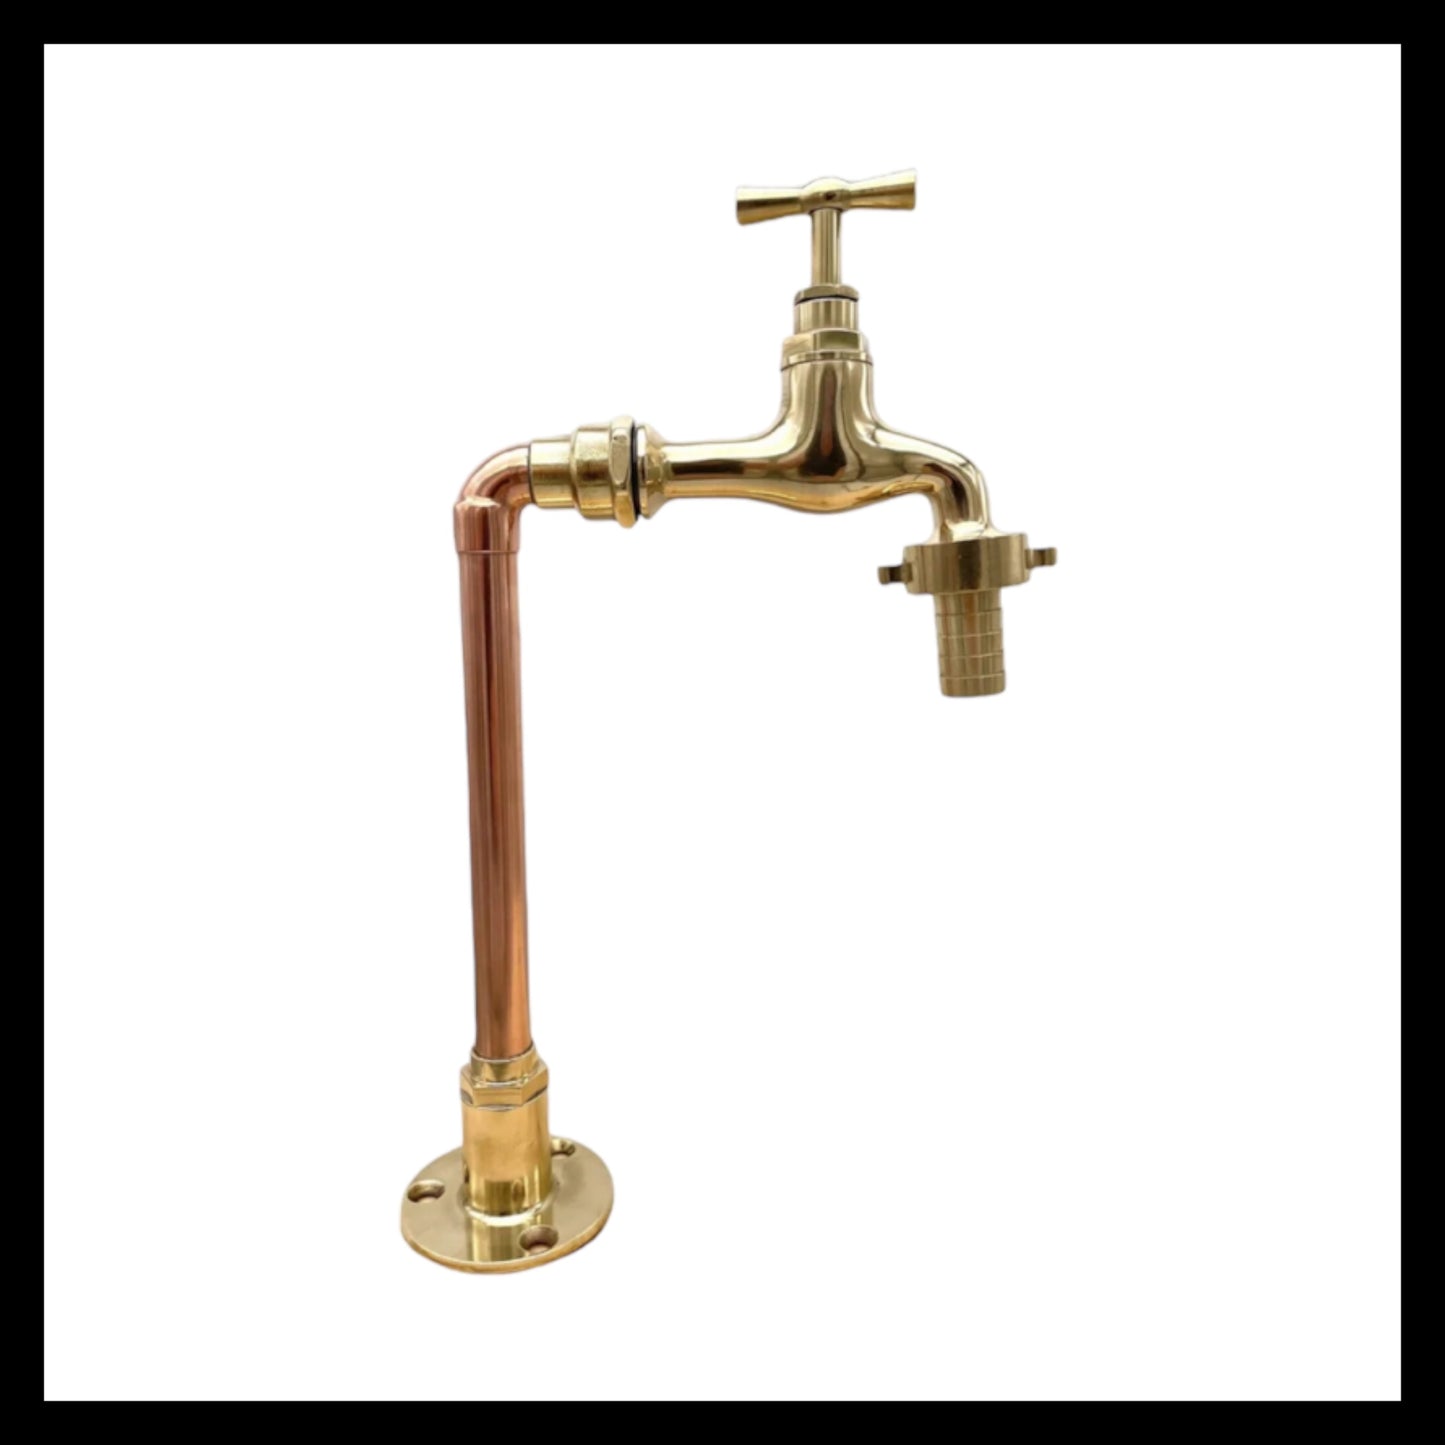 Handmade copper and brass vintage style vintage tap sold by All Things French Store